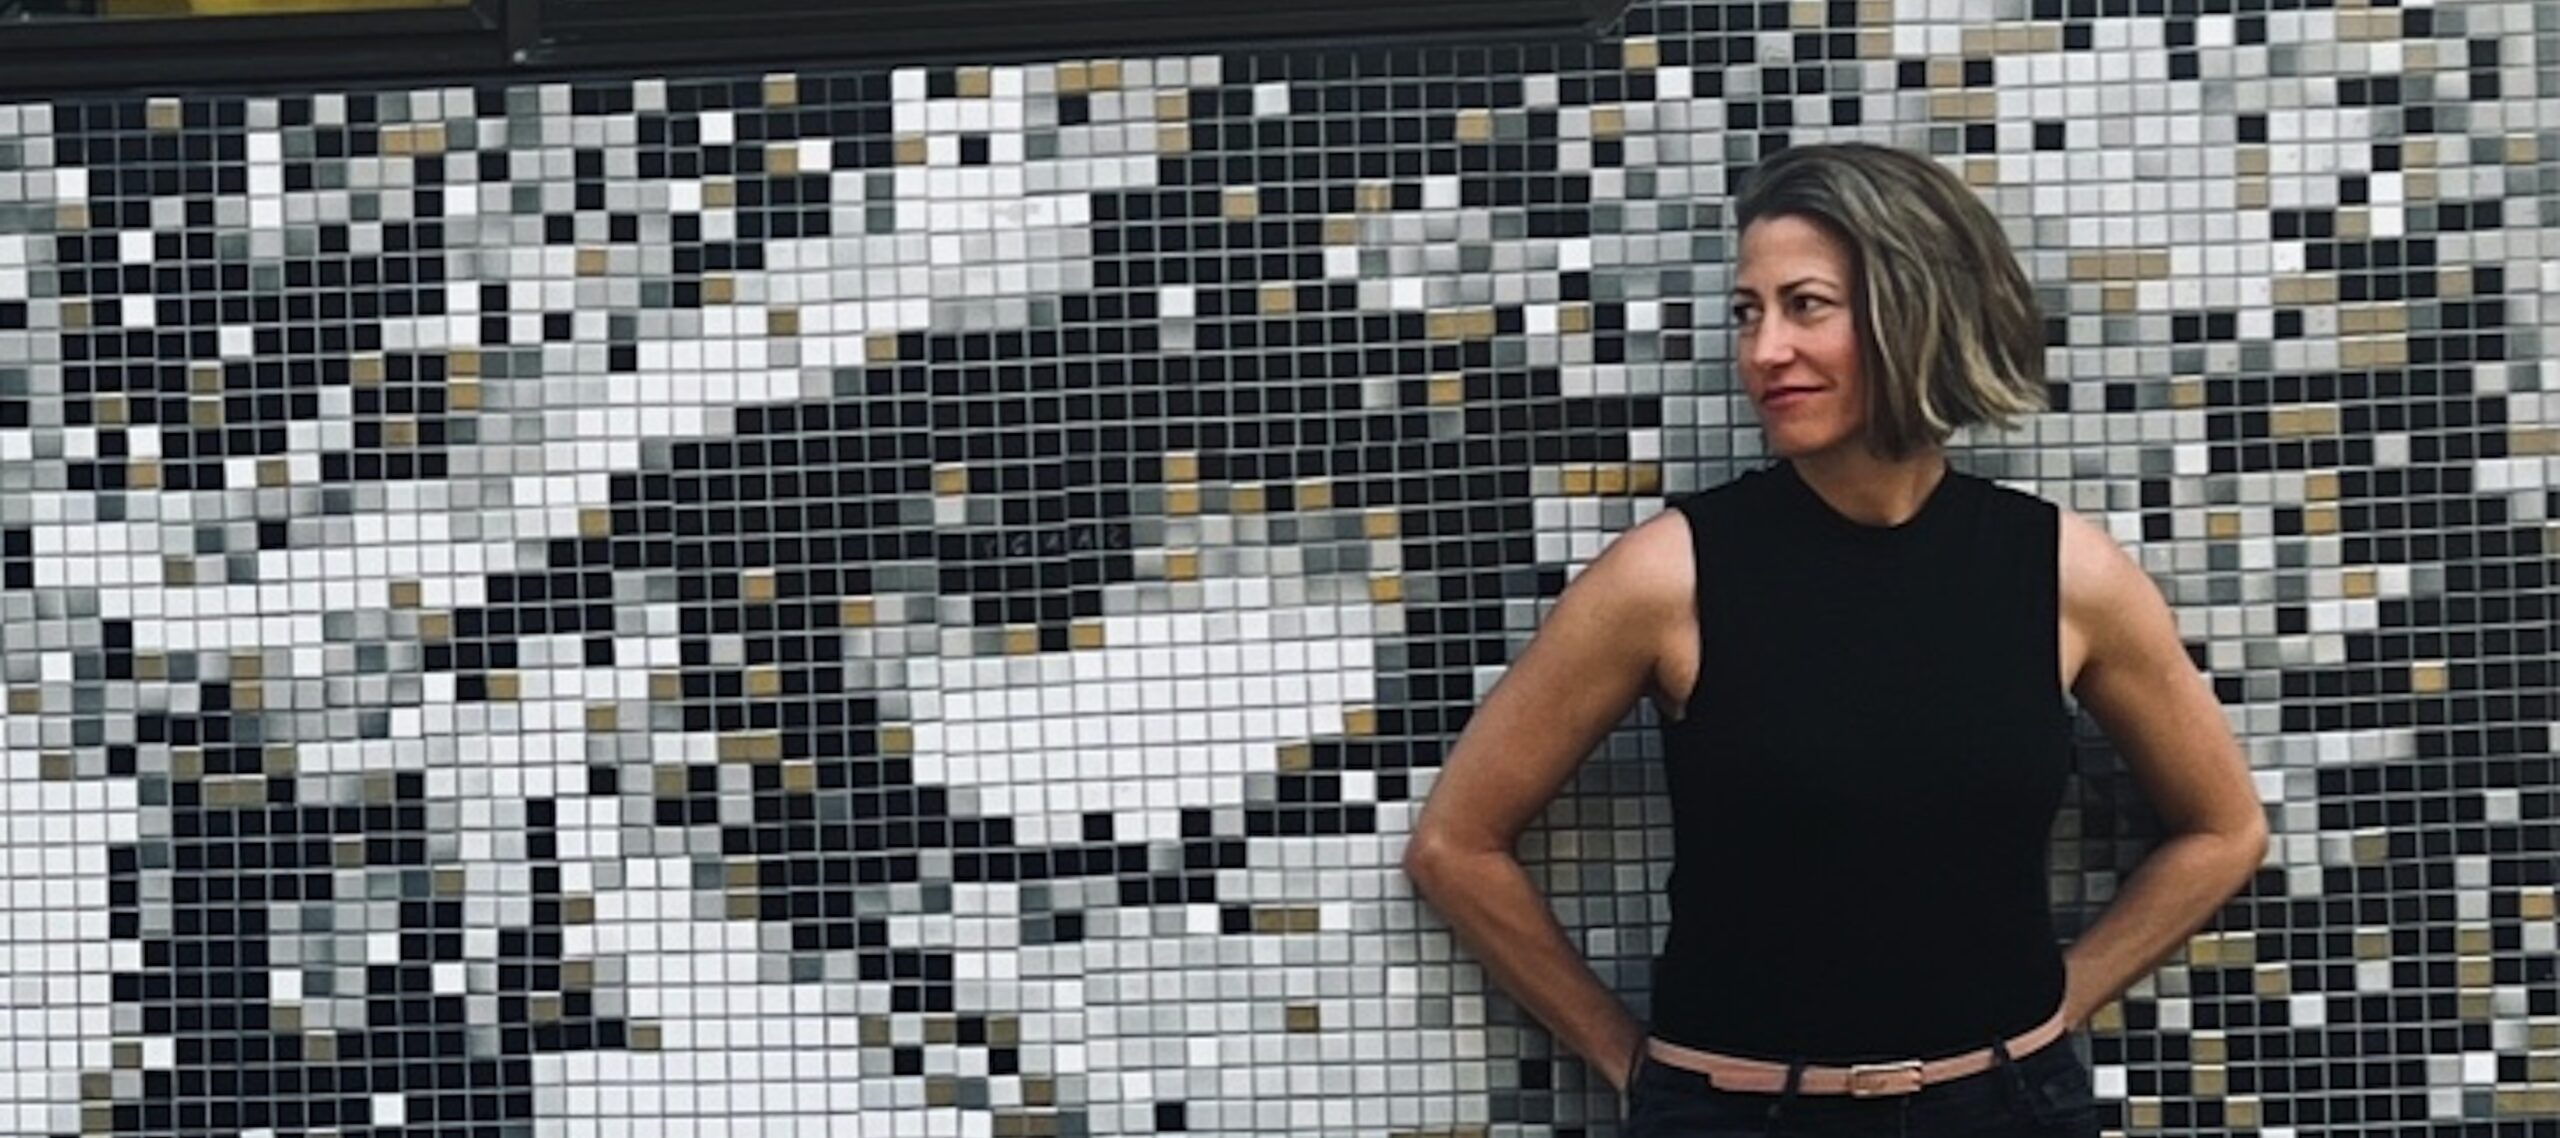 Cara Houser in front of a mural of an eye